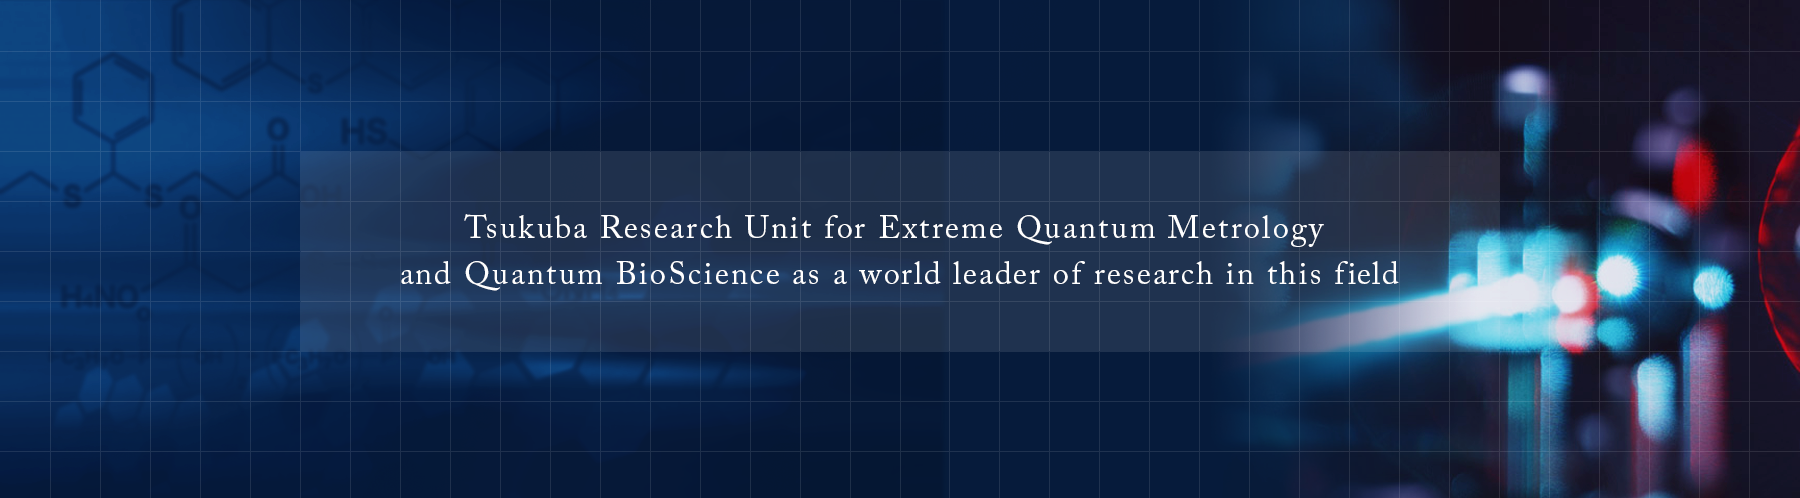 Tsukuba Research Unit for Extreme Quantum Metrology and Quantum BioScience as a world leader of research in this field　Tsukuba Research Unit for Extreme Quantum Metrology & Quantum BioScience